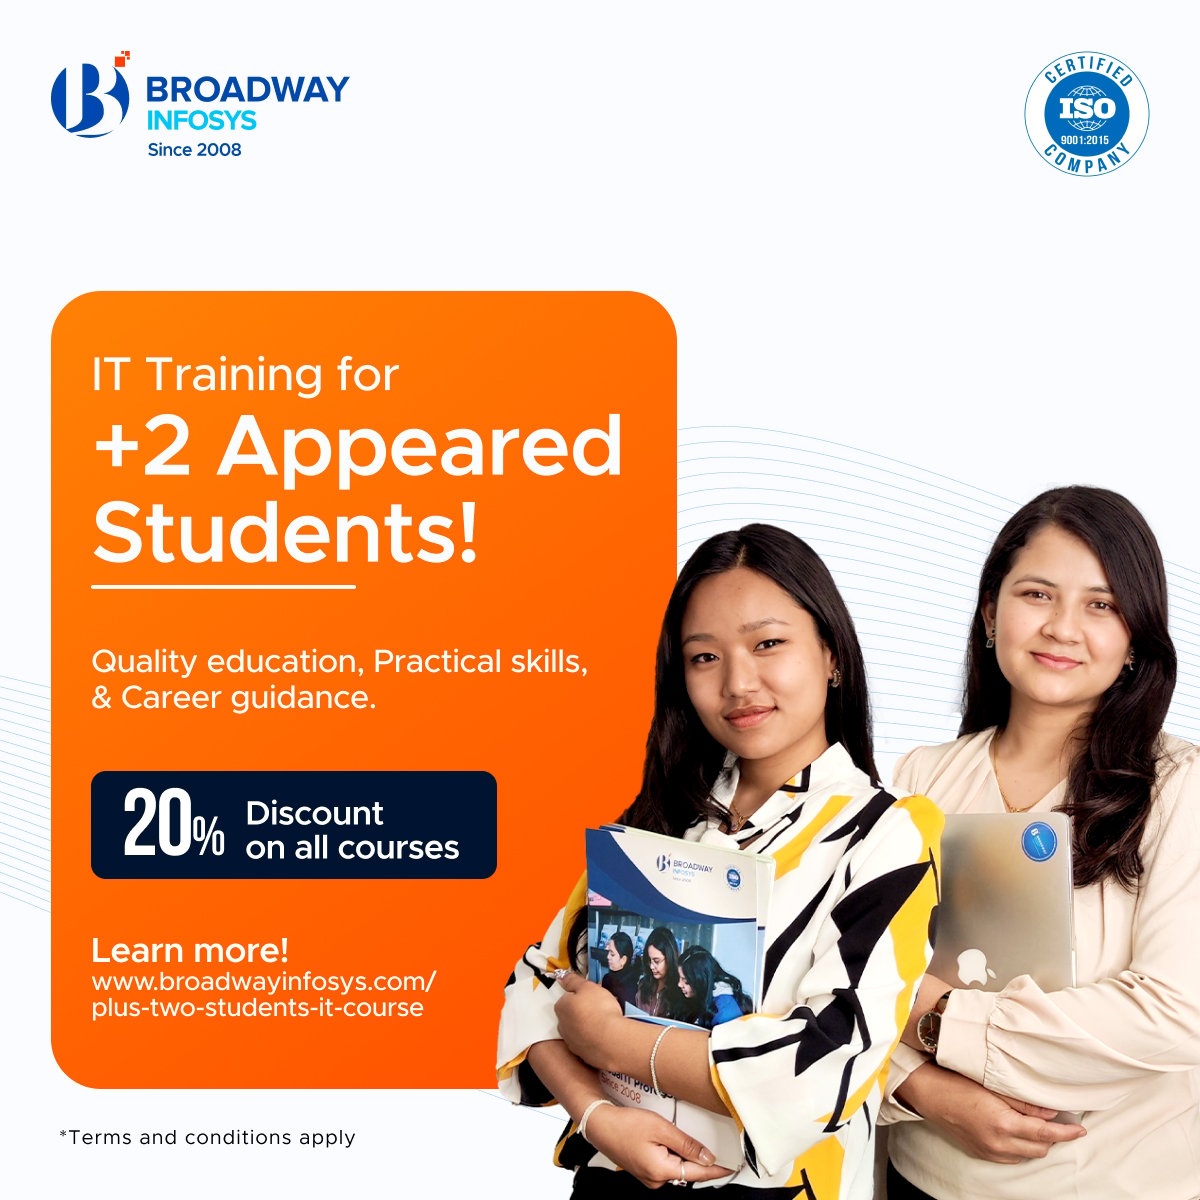 Broadway Infosys' Offer for 10+2 appeared Students 2081